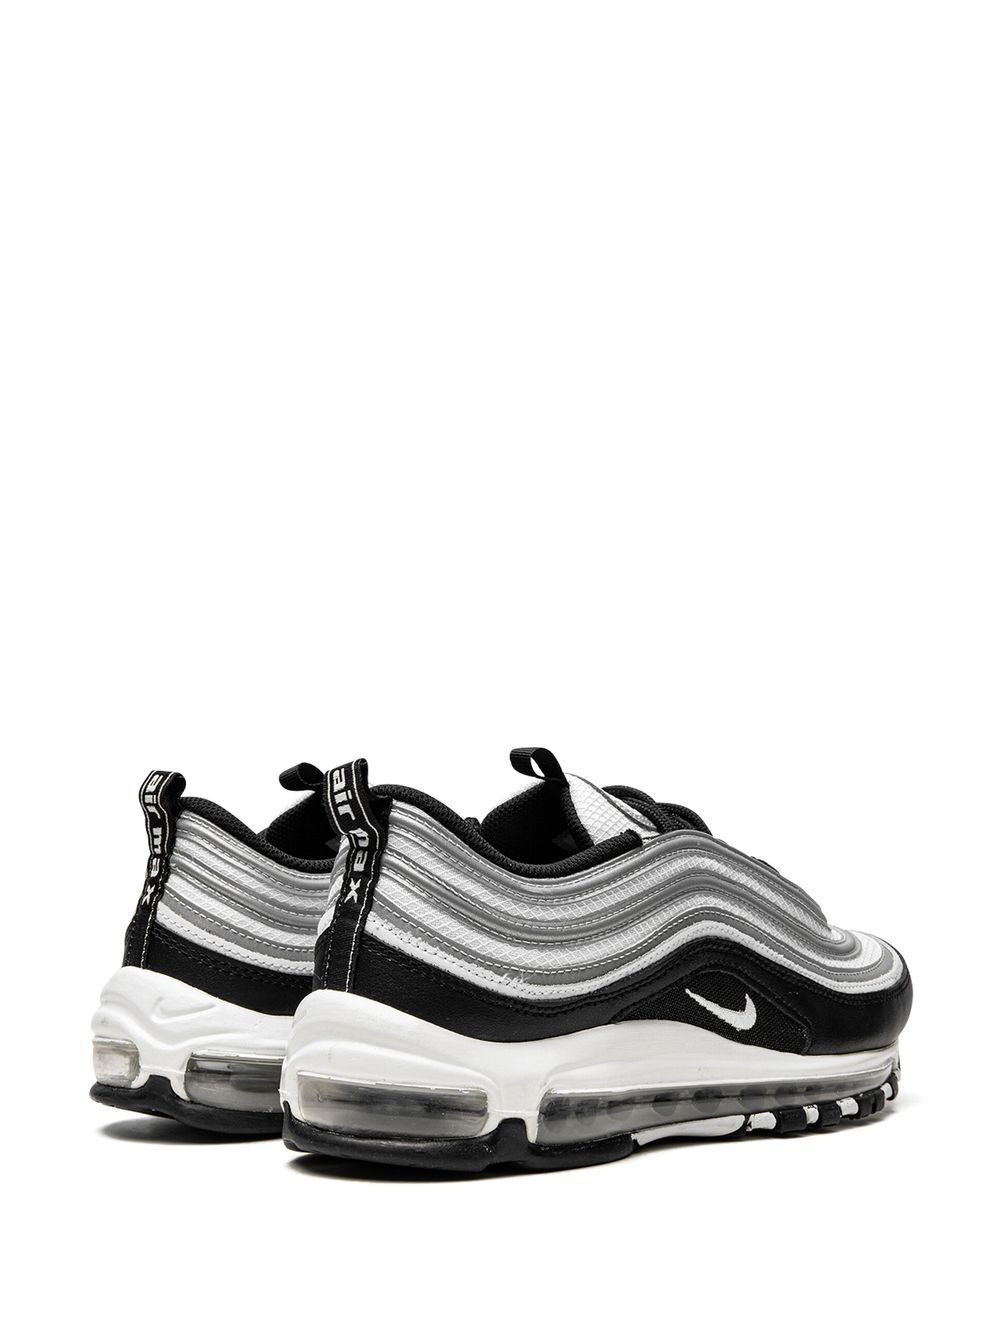 Air Max 97 "White/Black/Silver" sneakers - 3